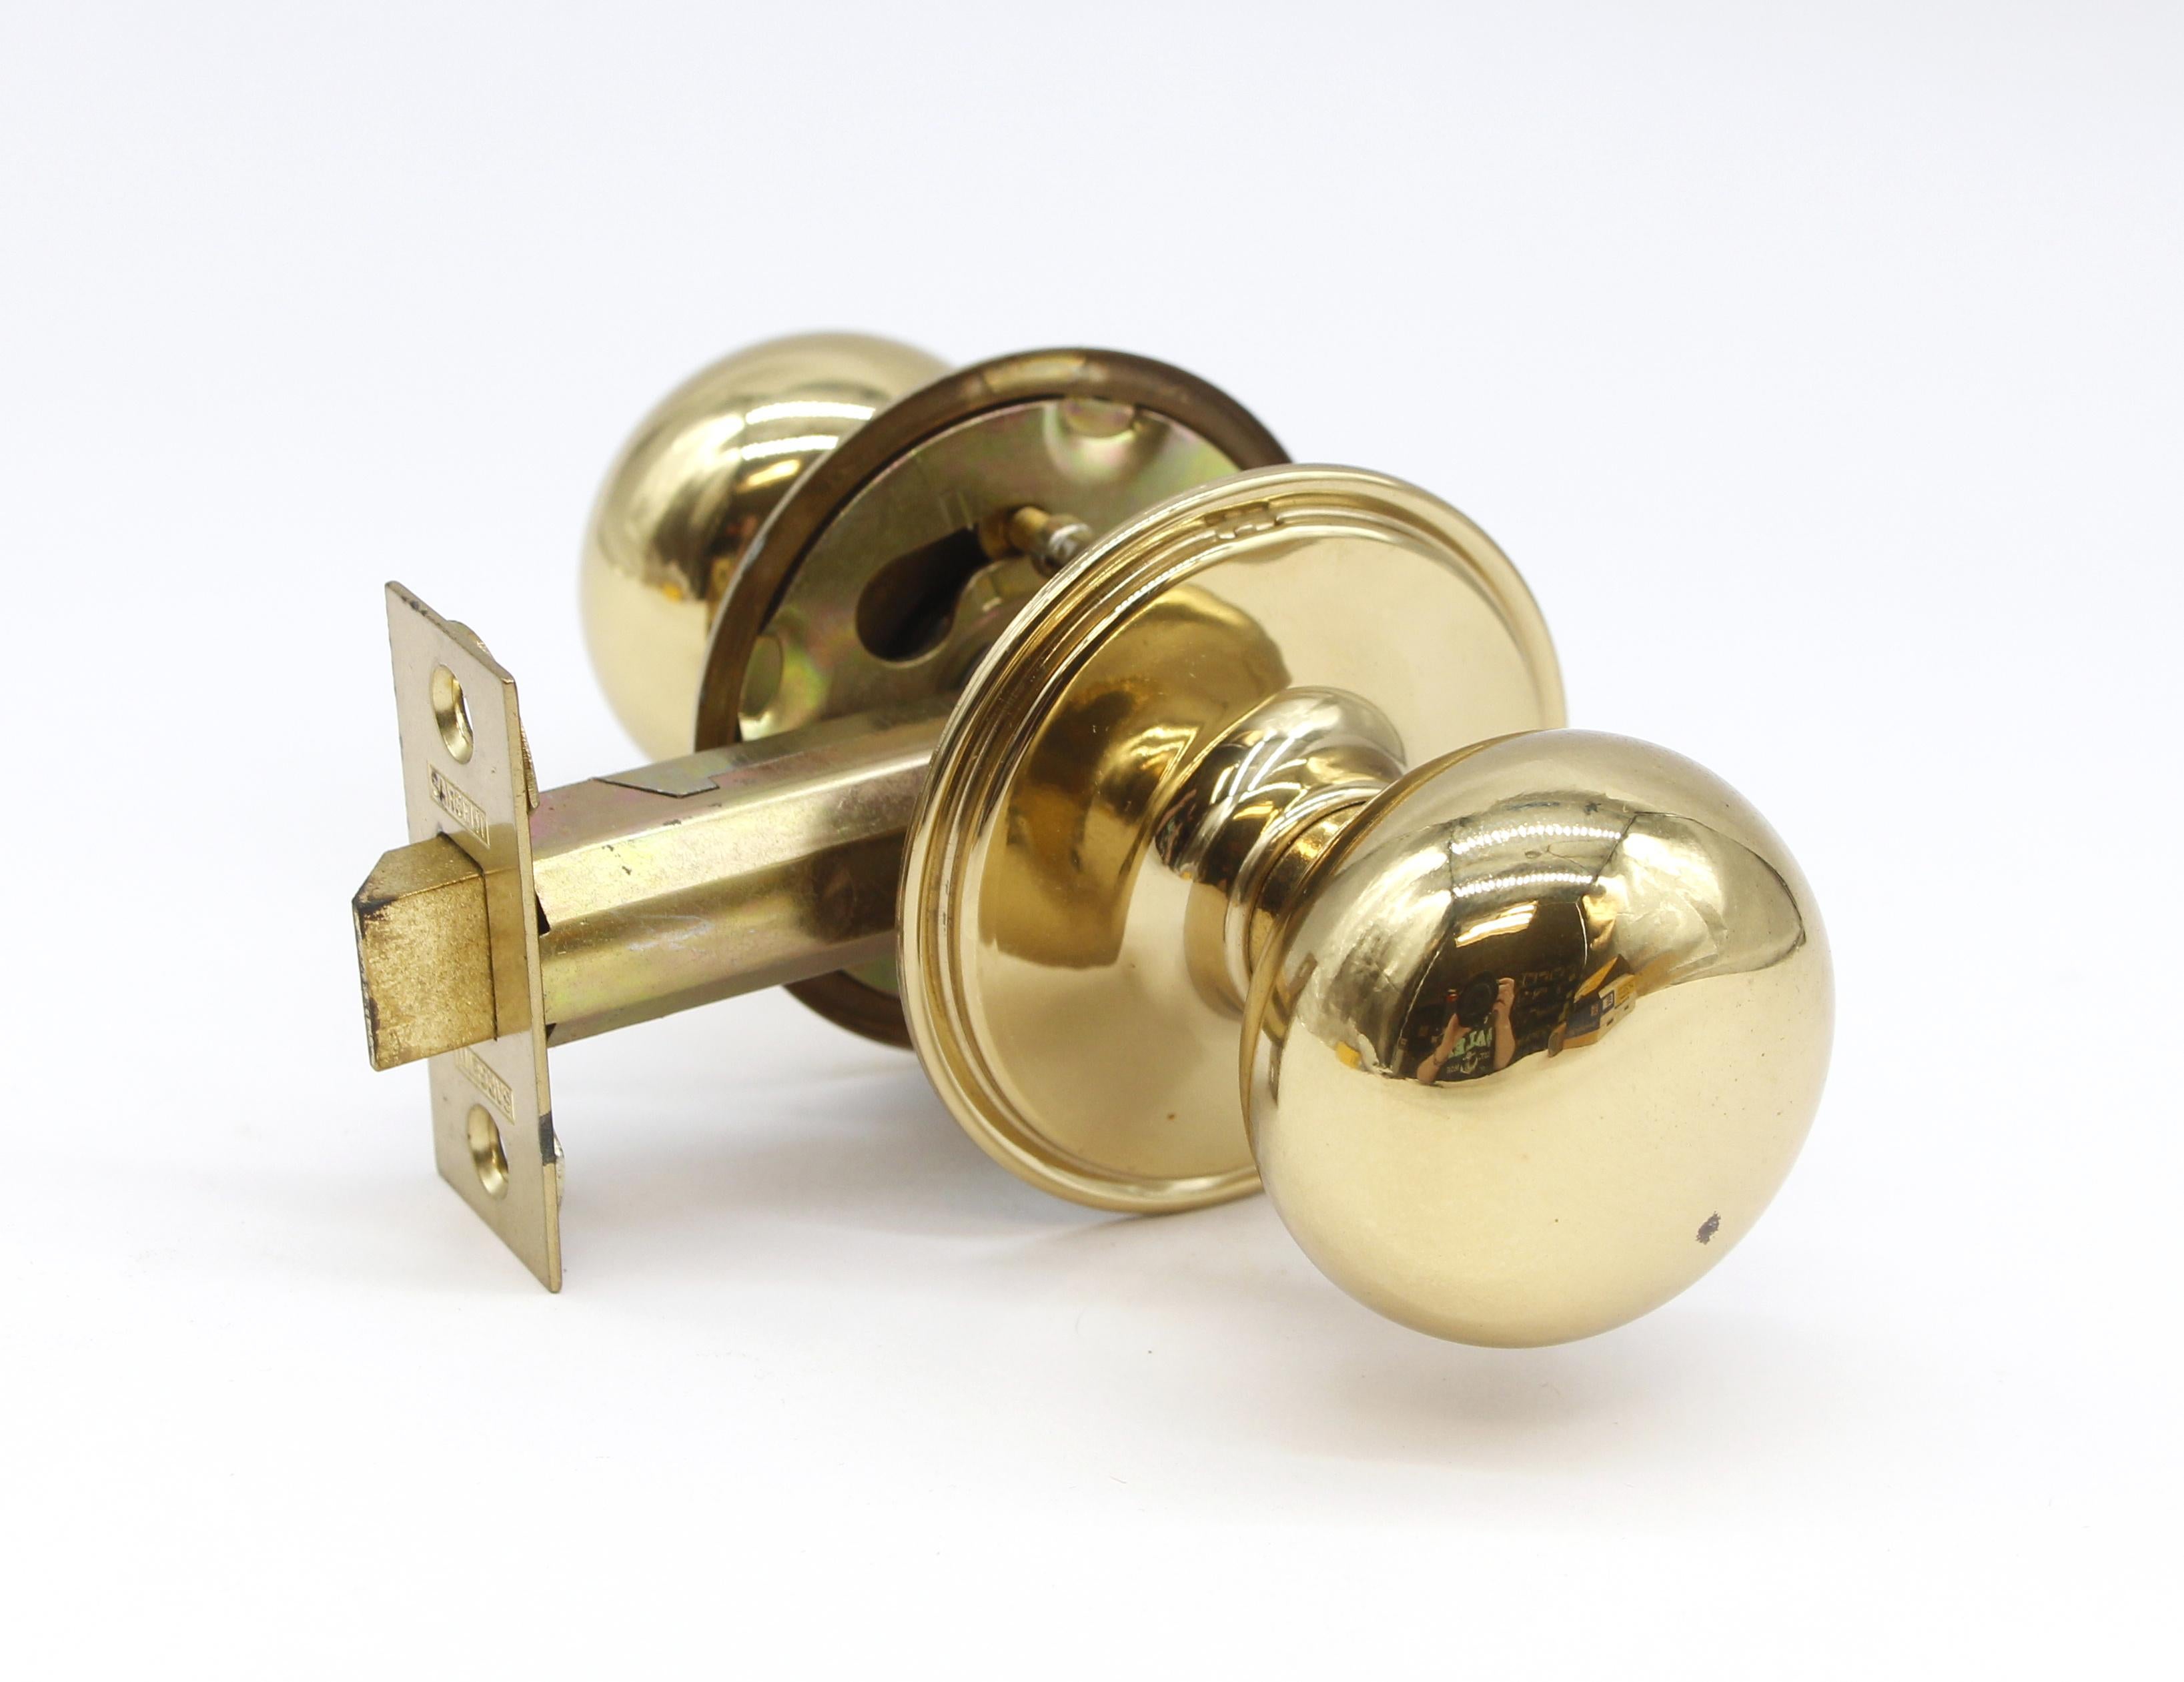 Mid-20th century new old stock polished finish brass passage door lock set manufactured by Sargent. 